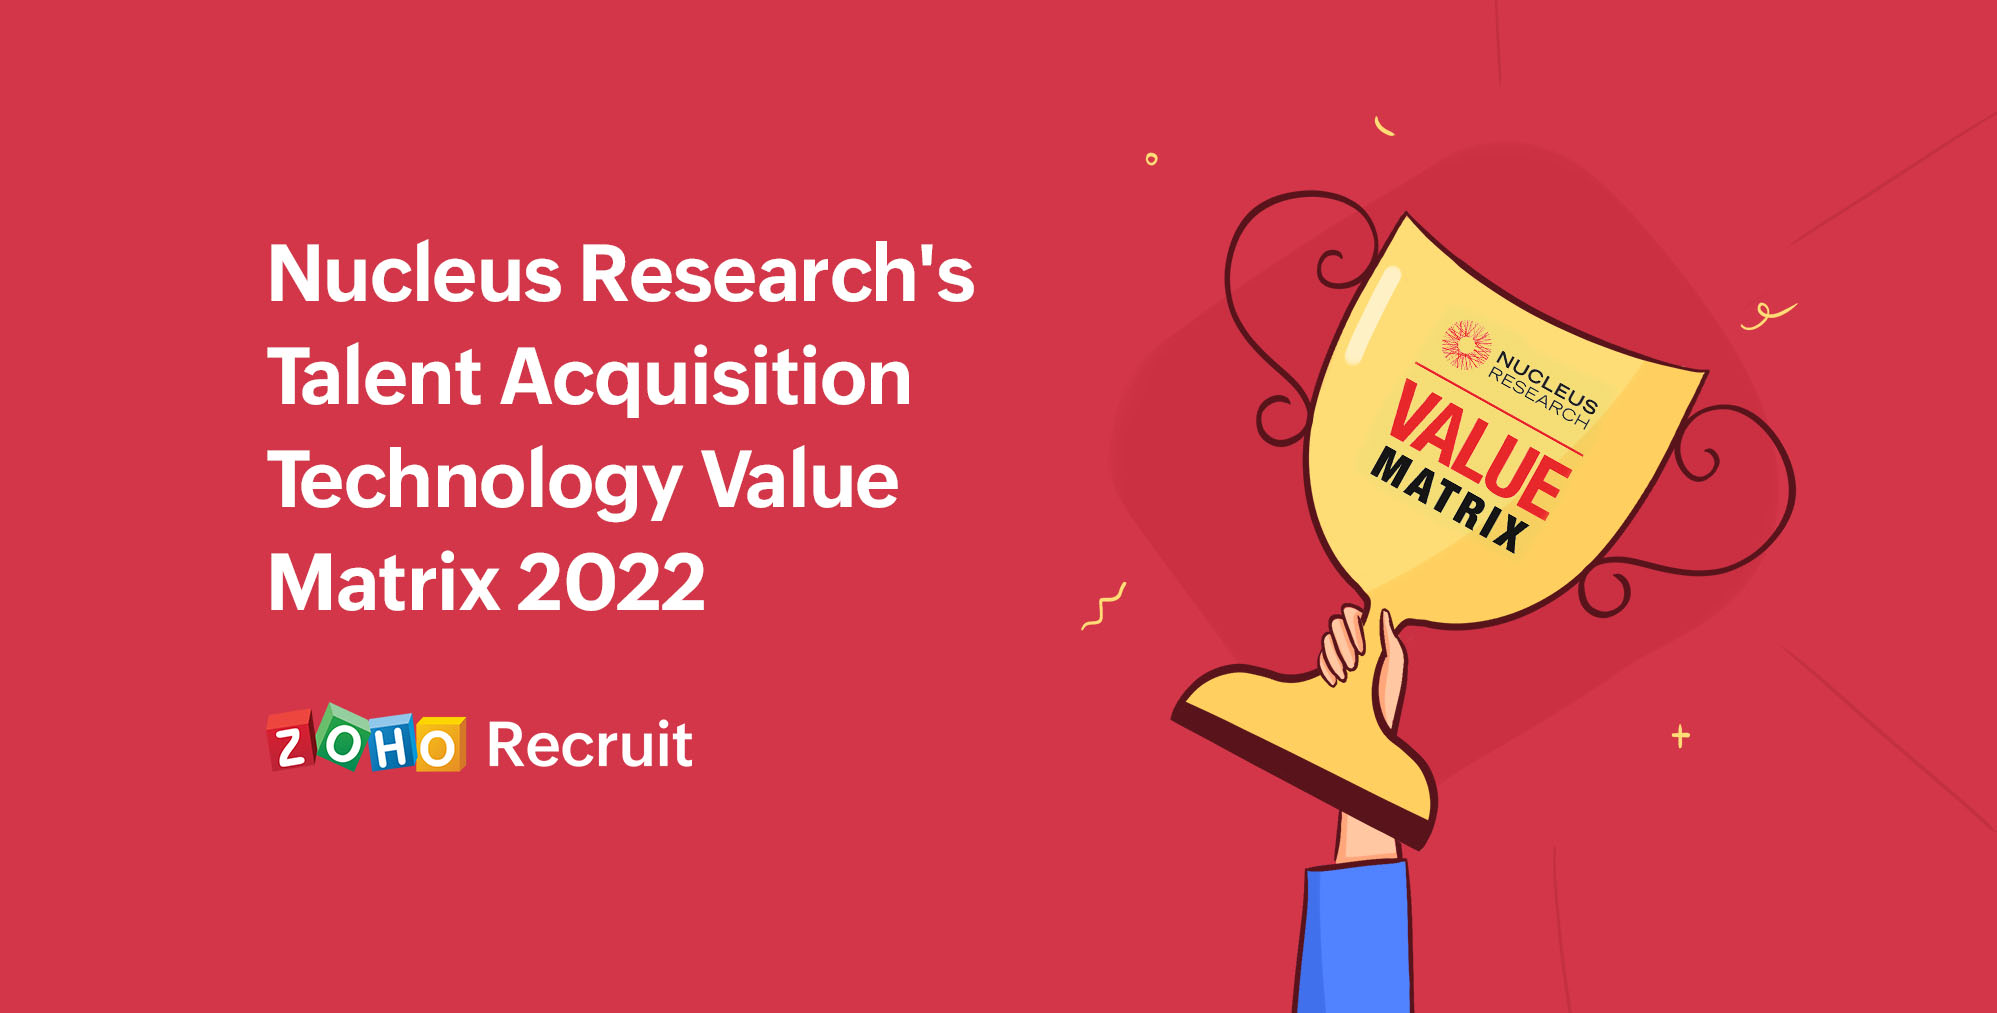 Zoho Recruit: a trending leader in talent acquisition technology